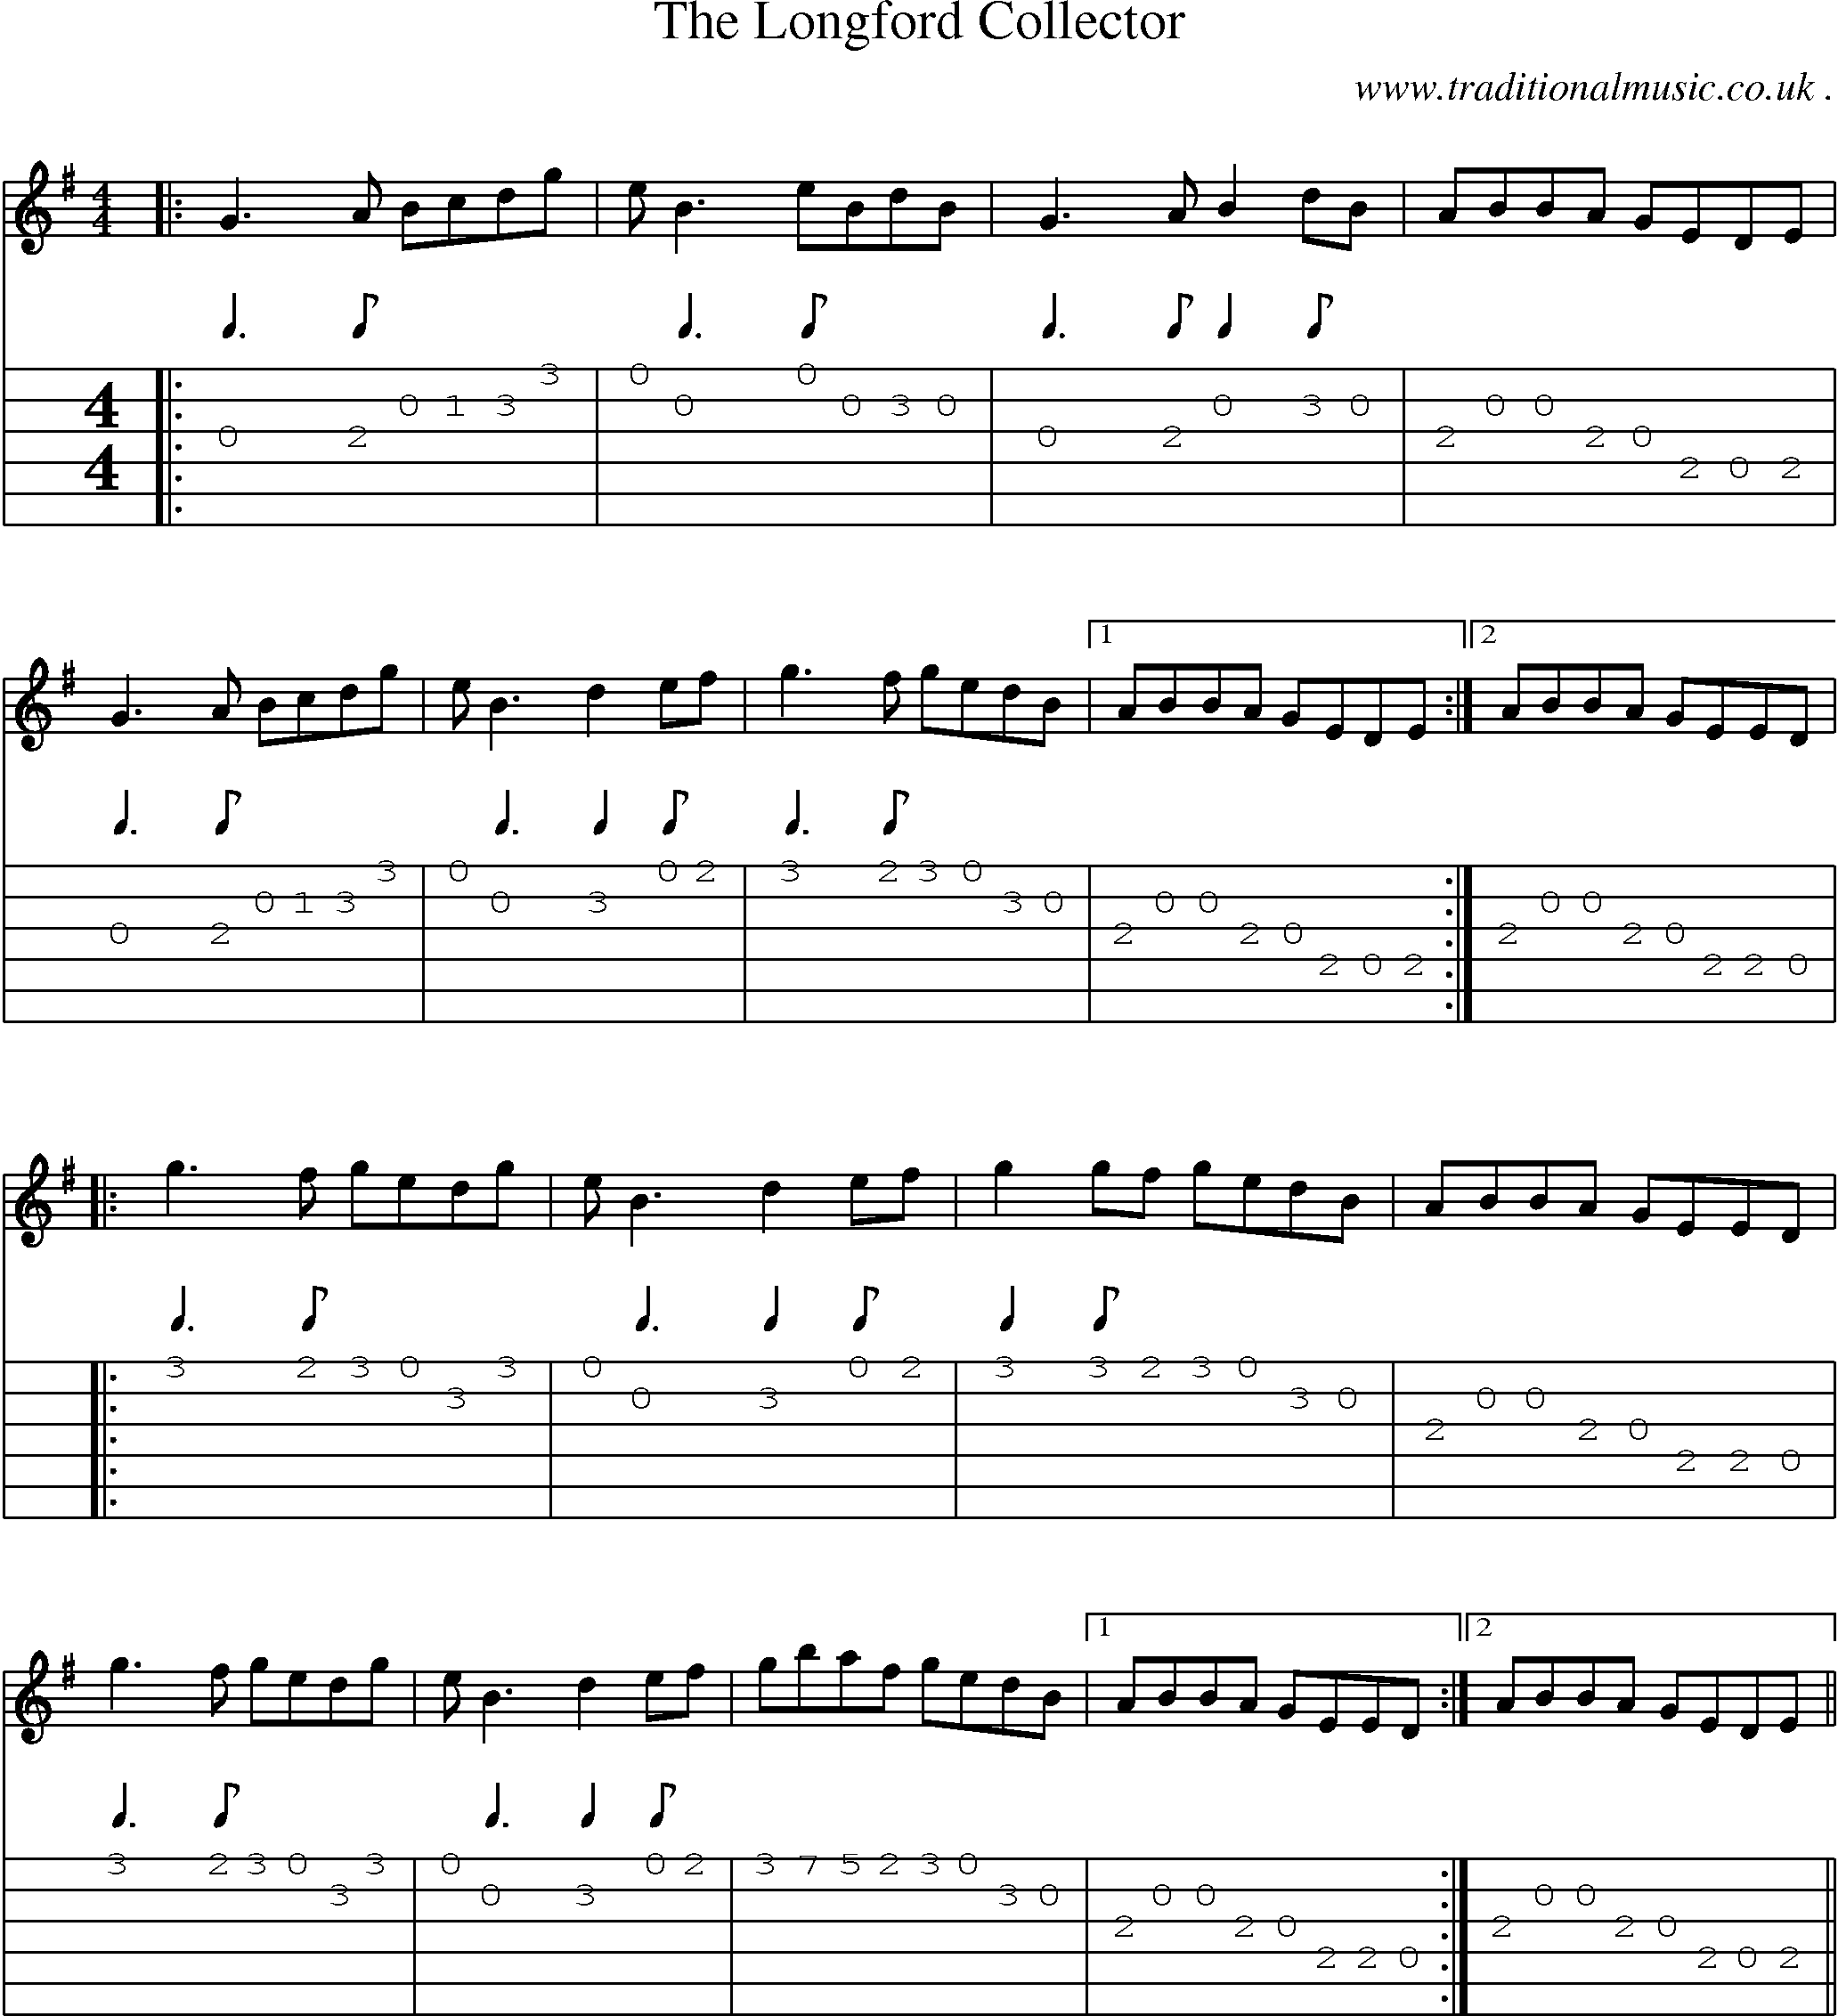 Sheet-Music and Guitar Tabs for The Longford Collector